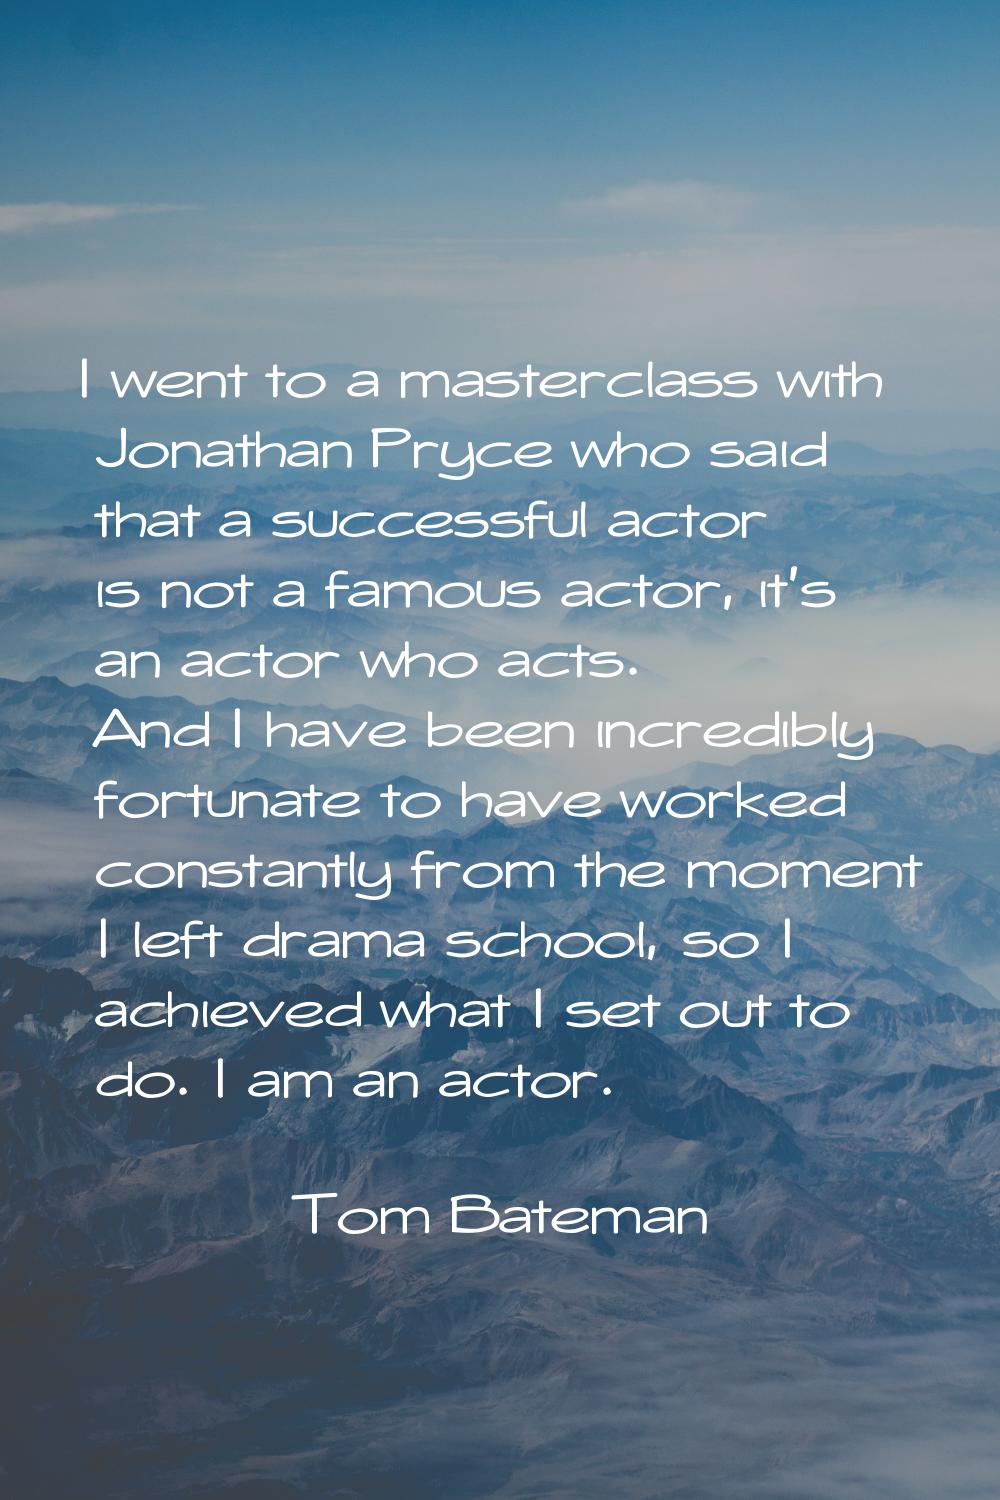 I went to a masterclass with Jonathan Pryce who said that a successful actor is not a famous actor,